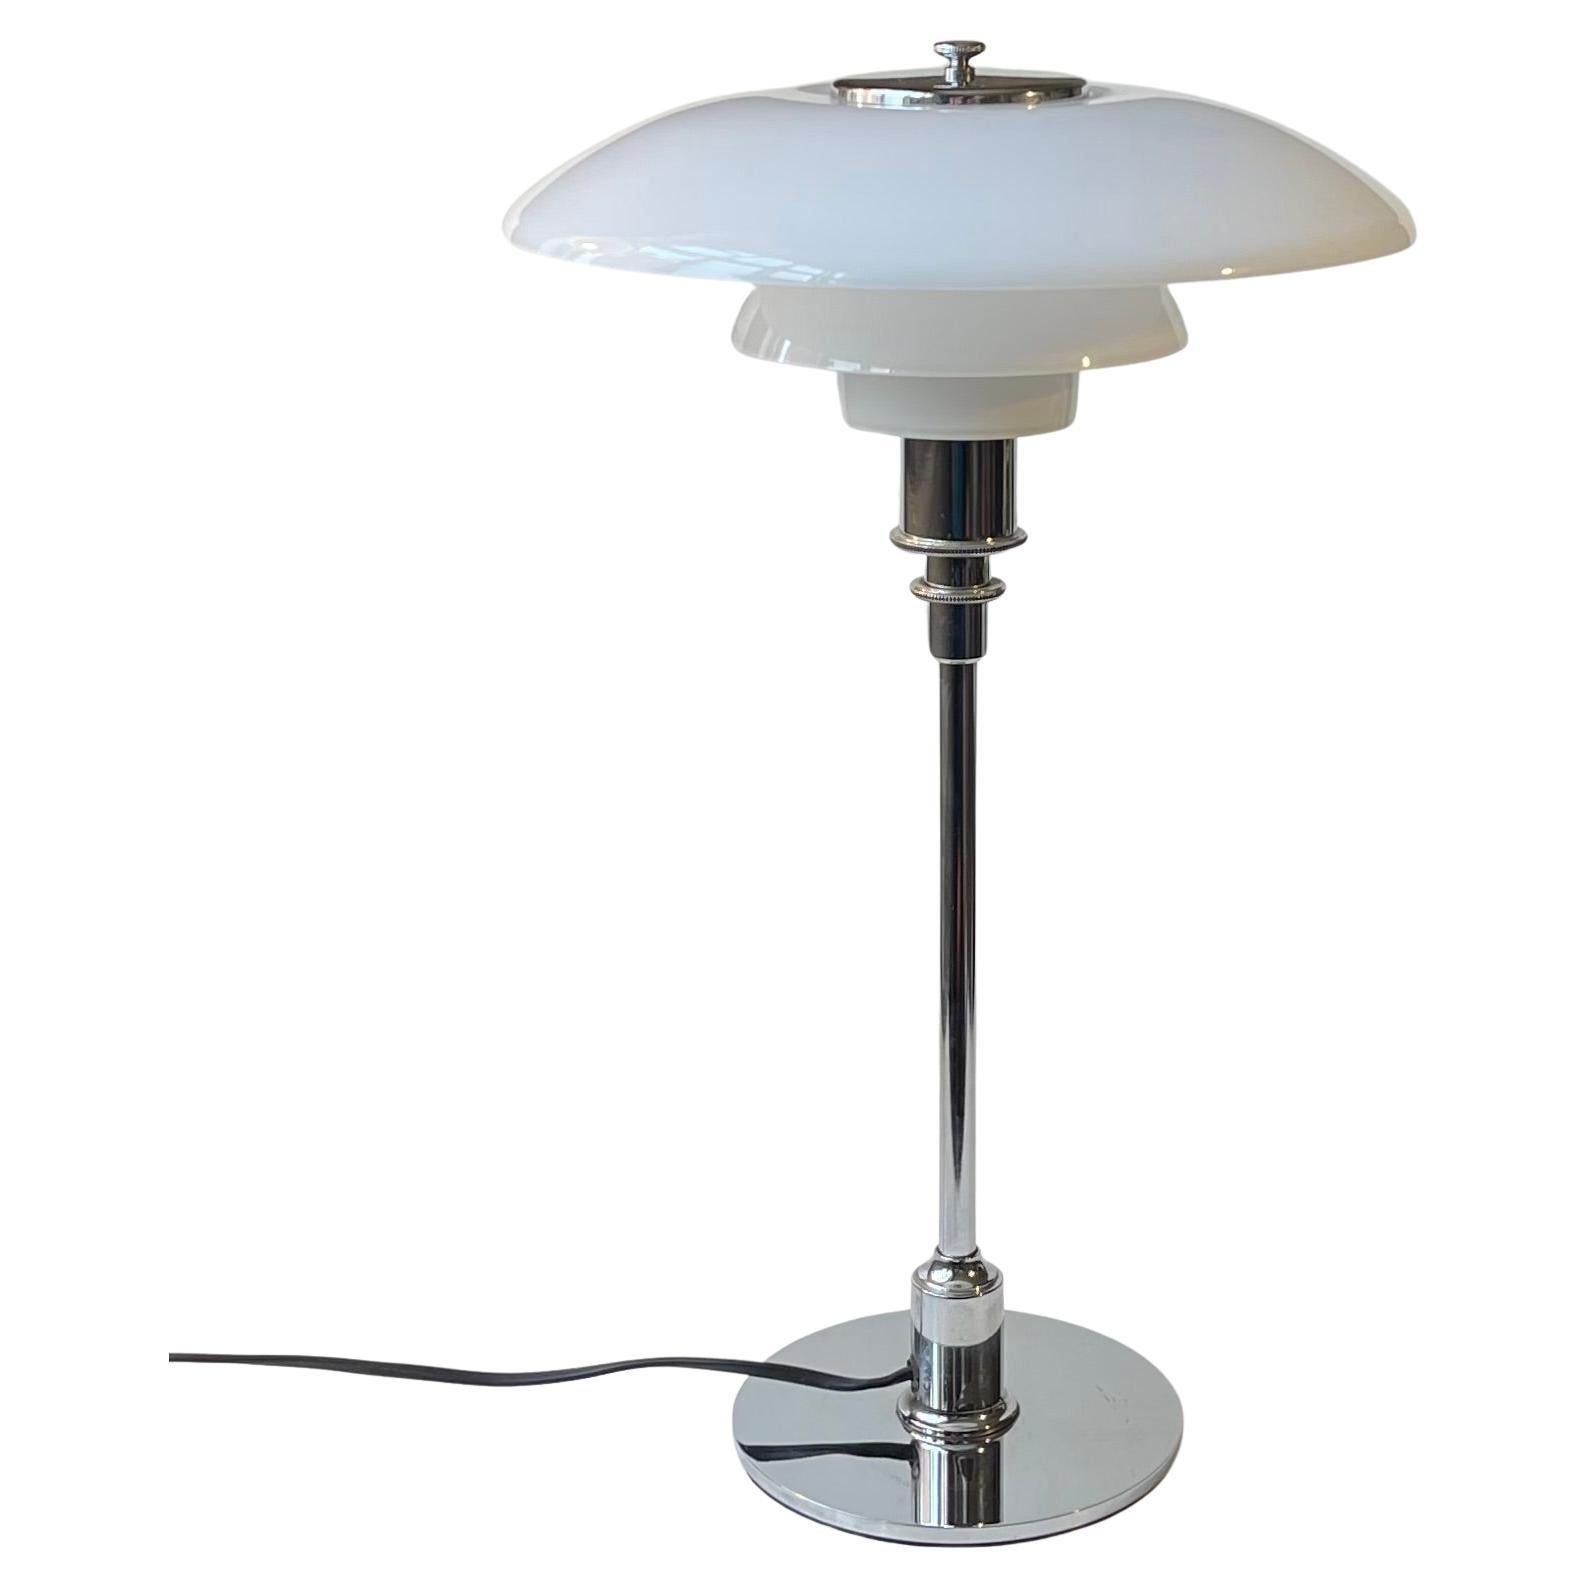 Based upon a design from the late 1920s this PH 3/2 desk lamp was relaunched by Louis Poulsen in Denmark in 1999. This particular table lamp is from that series. It features a 3-tiered shading system in white opaline glass and base, rod and details